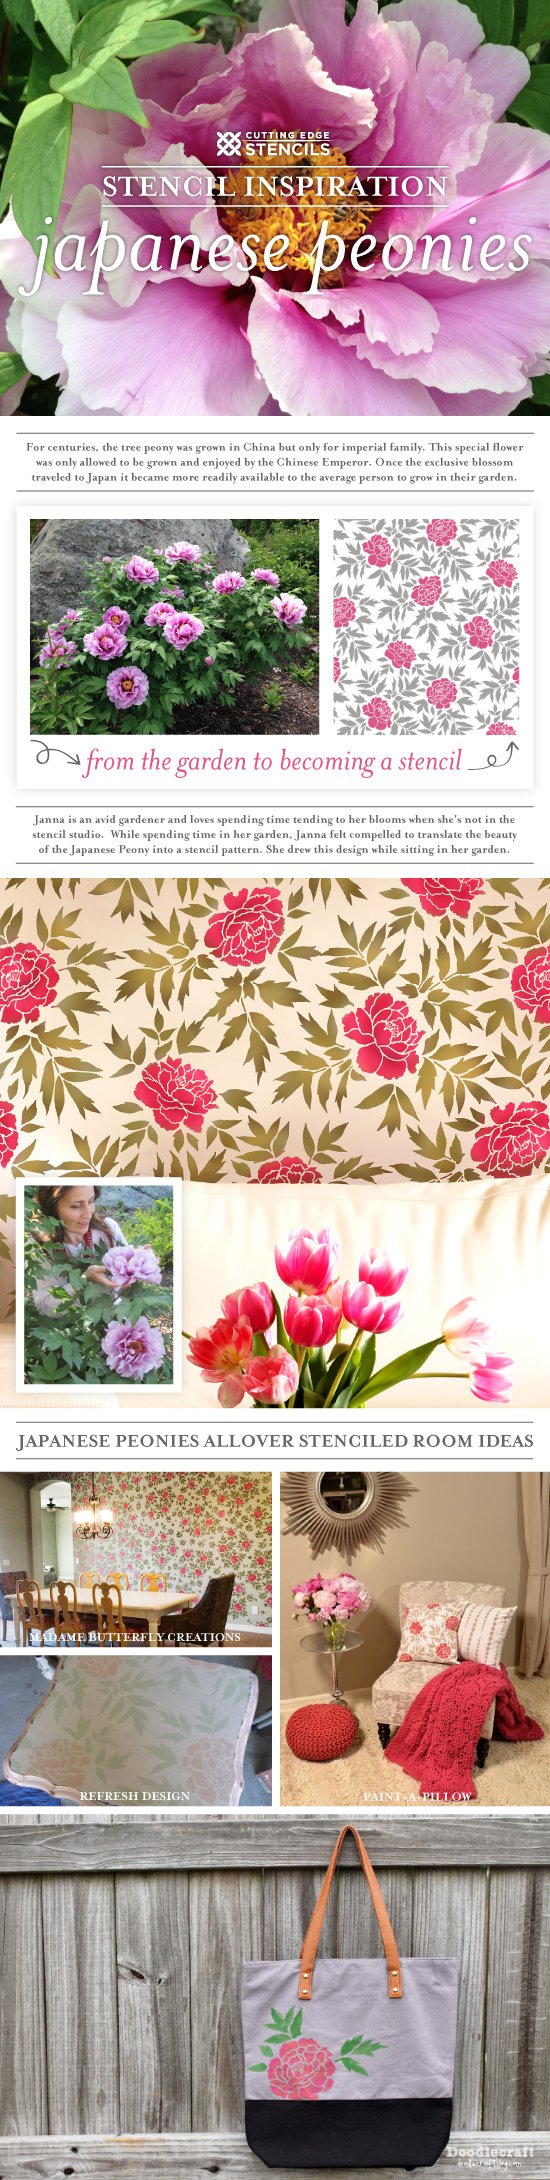 Cutting Edge Stencils shares DIY the inspiration for the Japanese Peonies Stencil and stenciled home decor ideas. http://www.cuttingedgestencils.com/japanese-peonies-floral-stencil-pattern.html